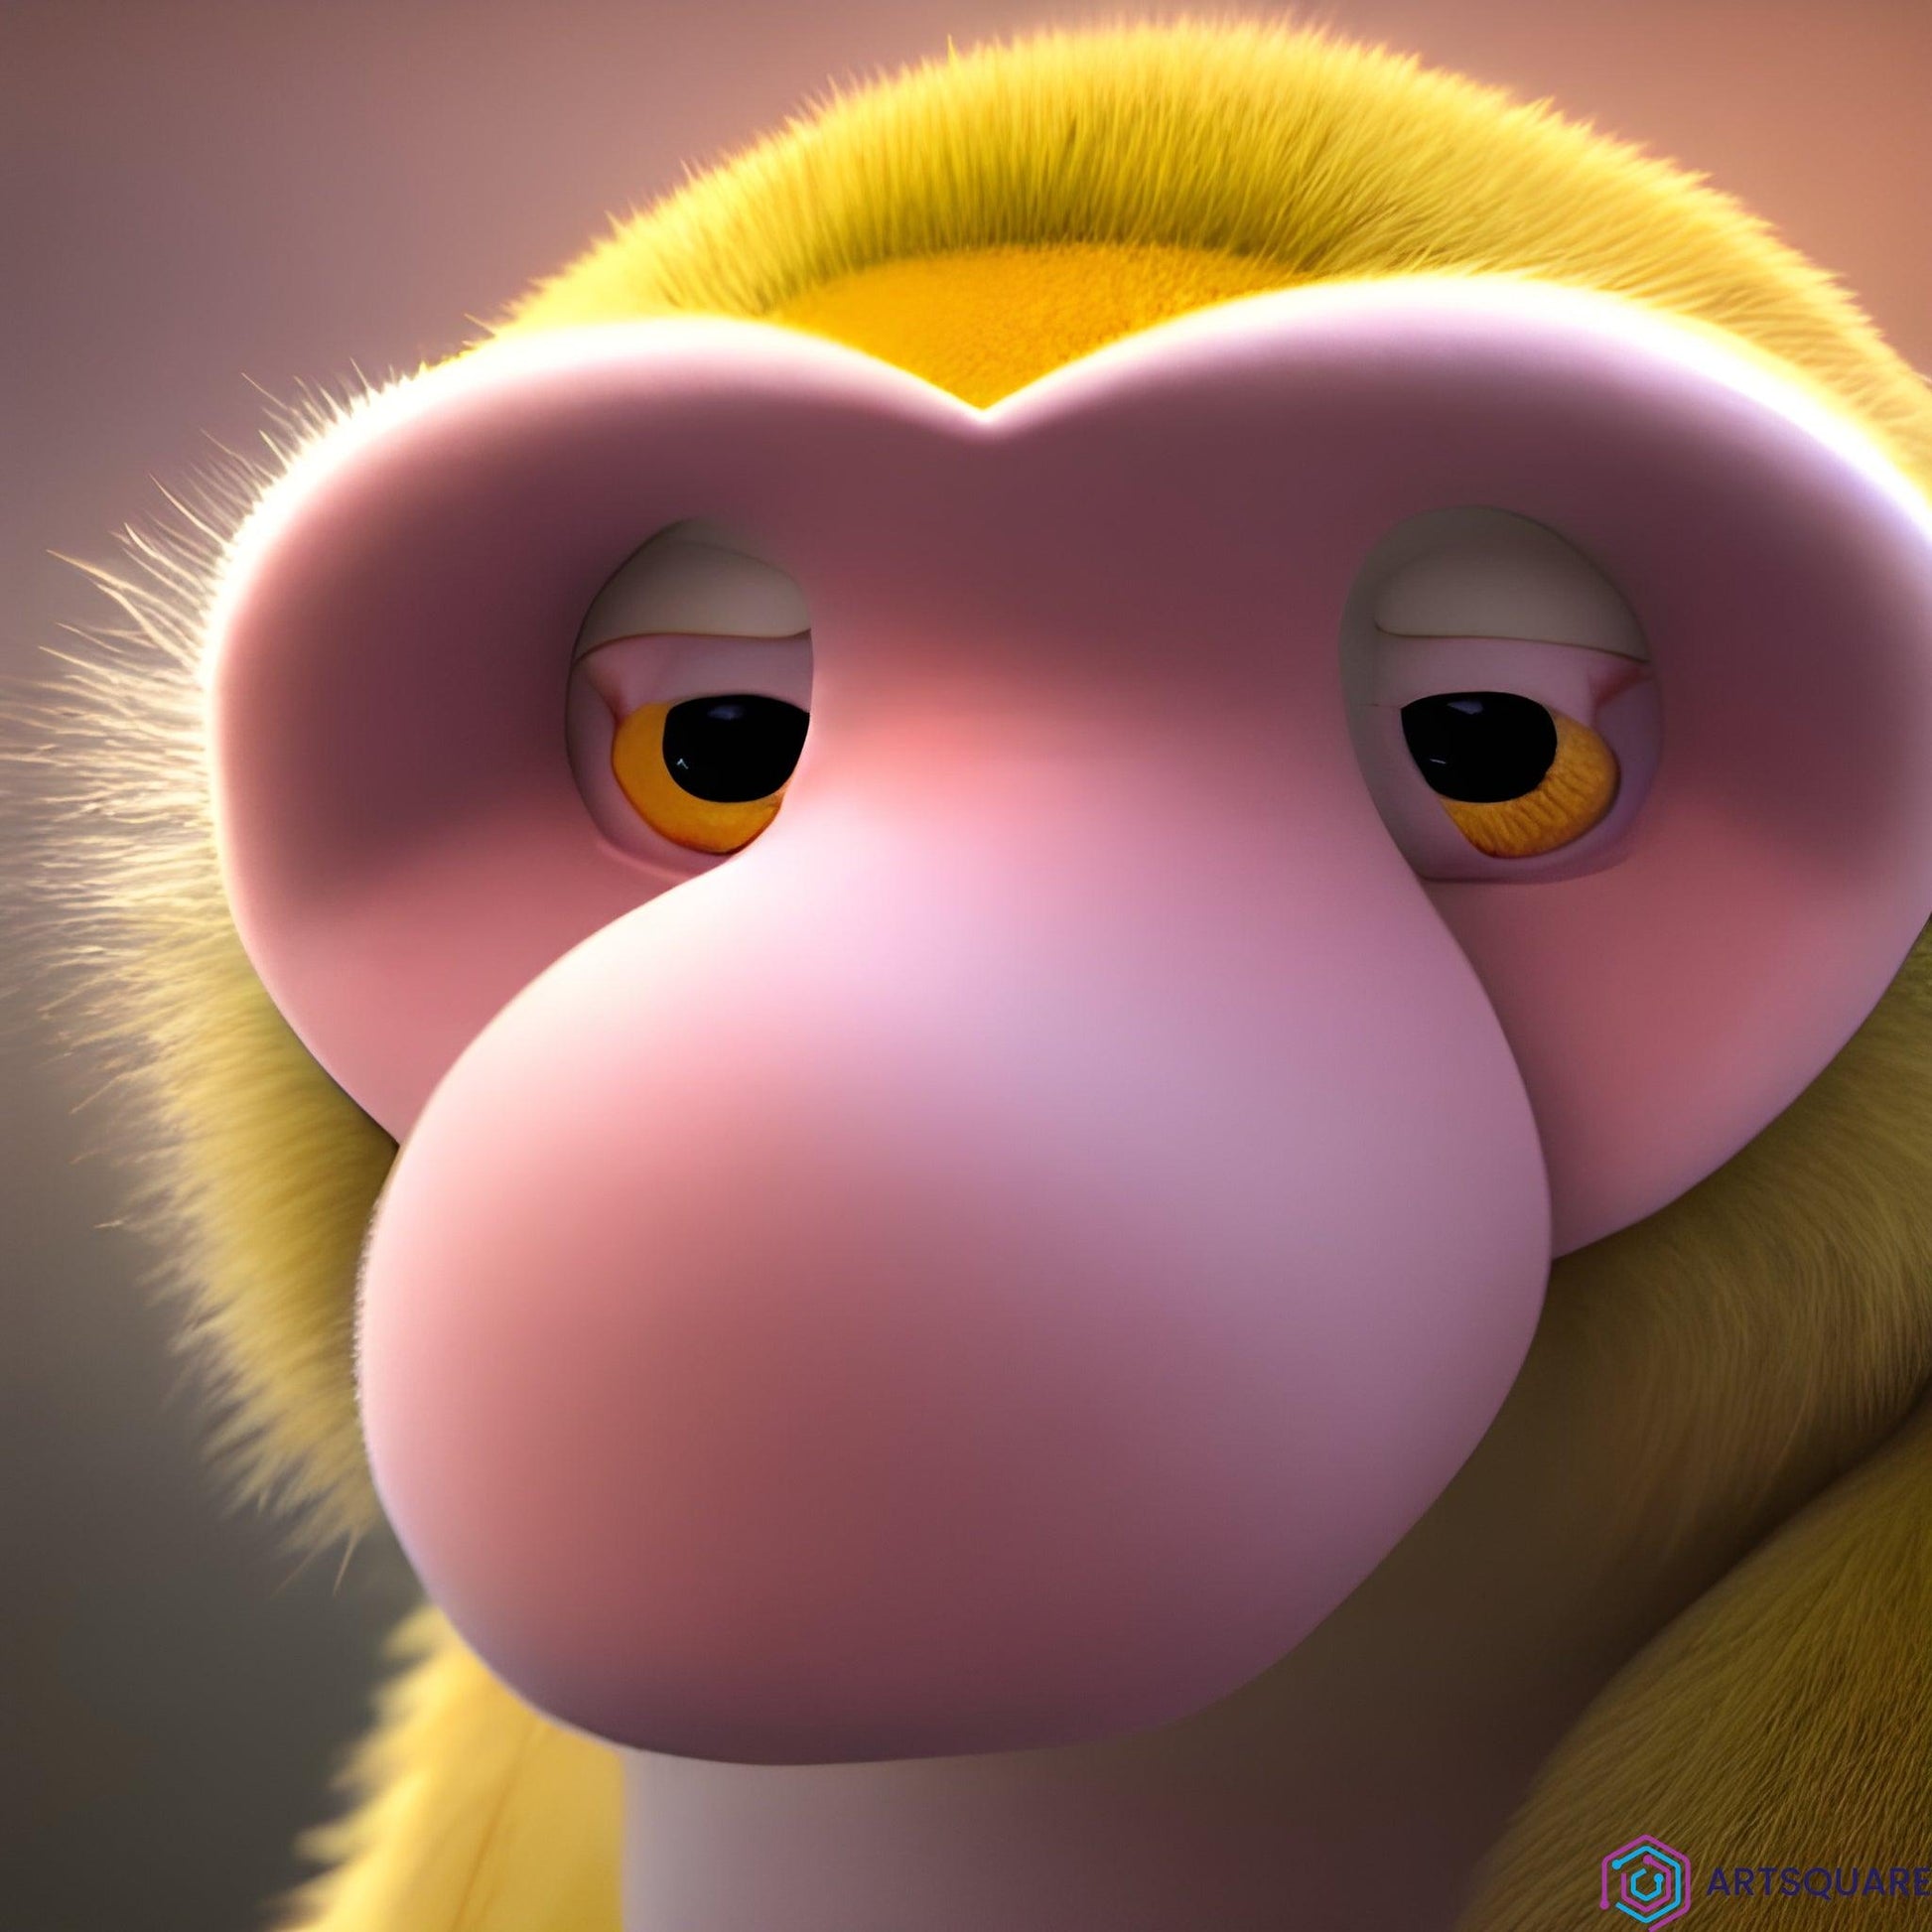 A monkey with a long and funny proboscis. This digital image is perfect for those who love strange and funny animals. This image is part of a limited collection of only 500 copies, each with a unique serial number ranging from 